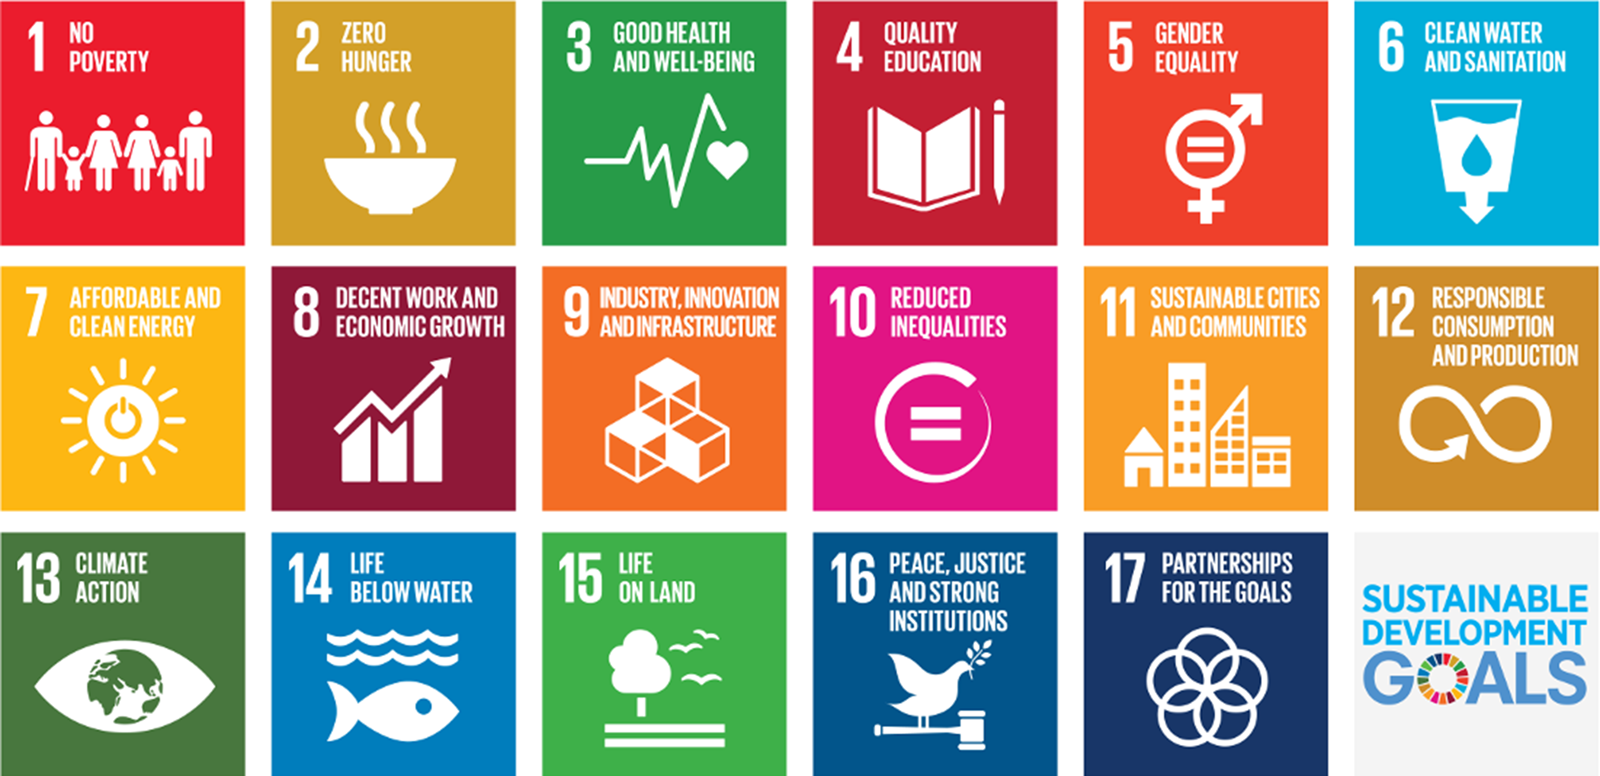 research papers on sustainable development goals